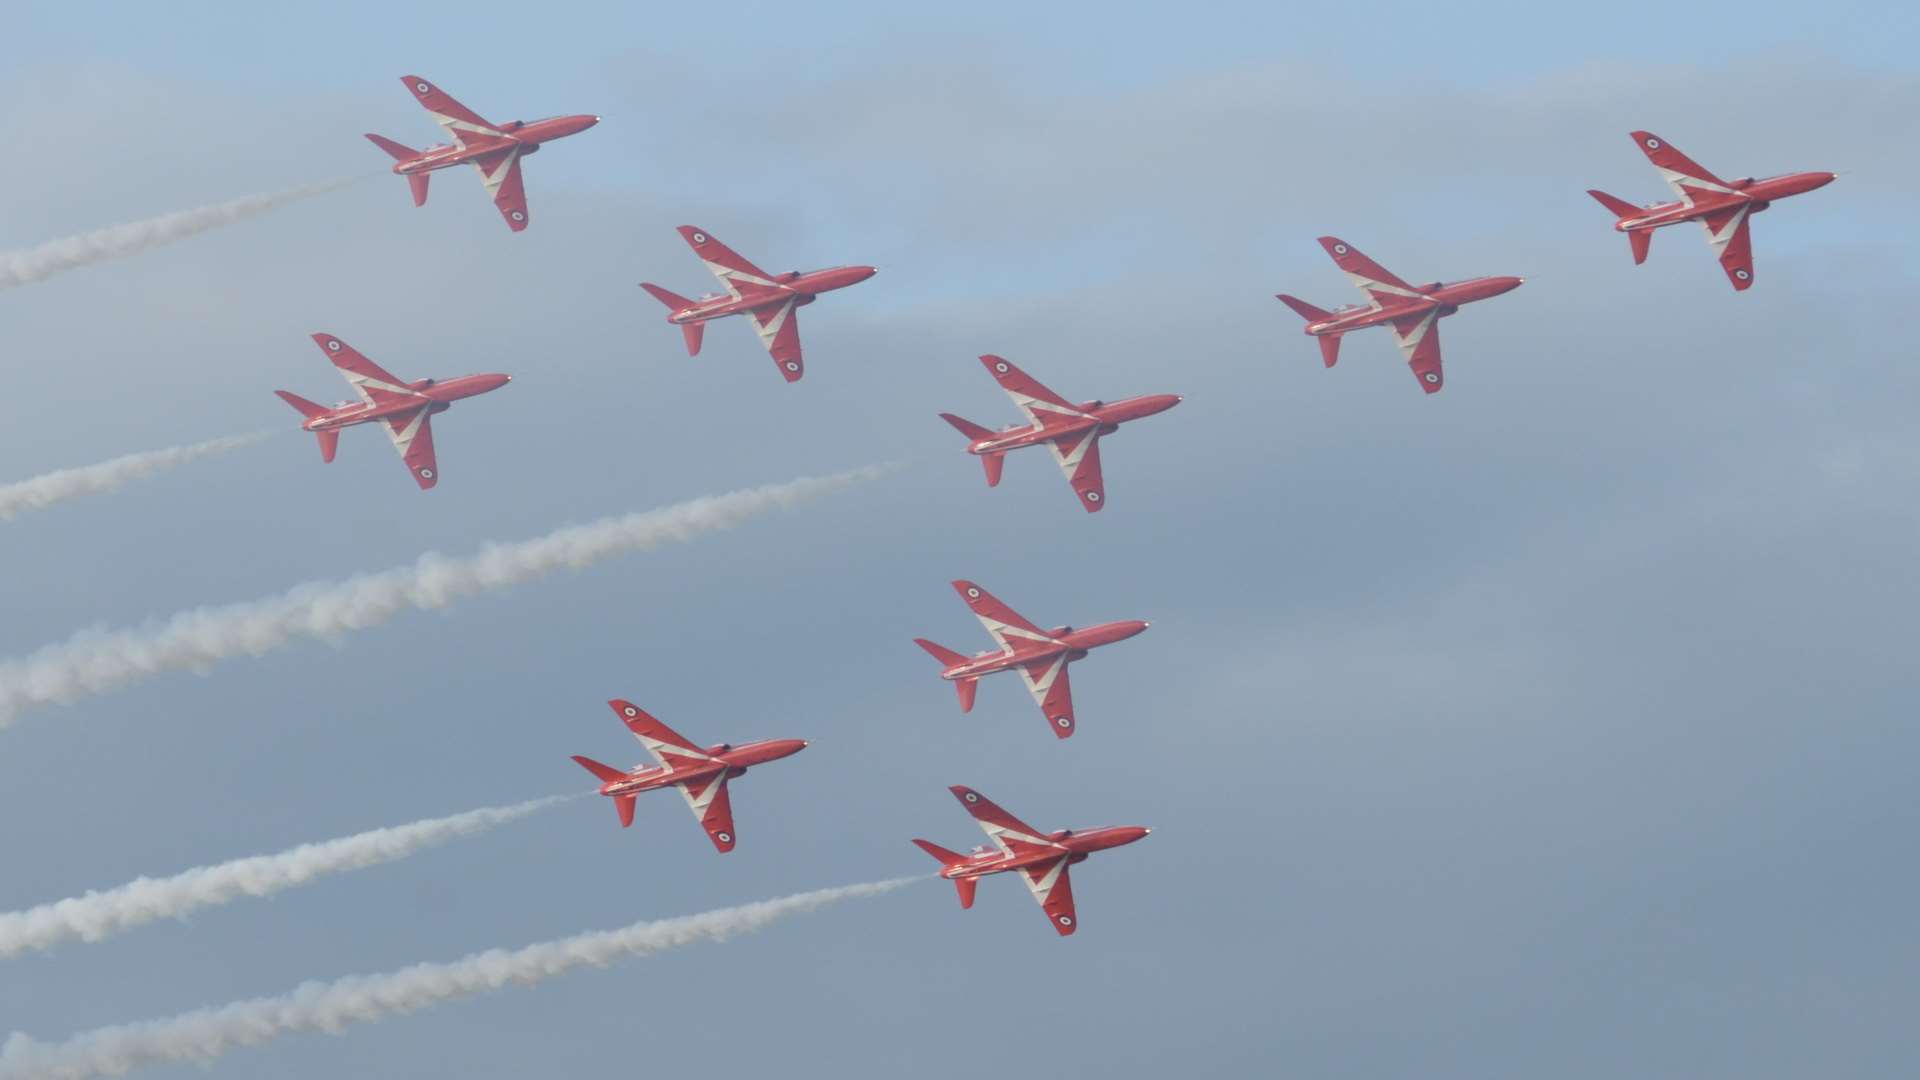 The Red Arrows in action. Picture: Chris Davey